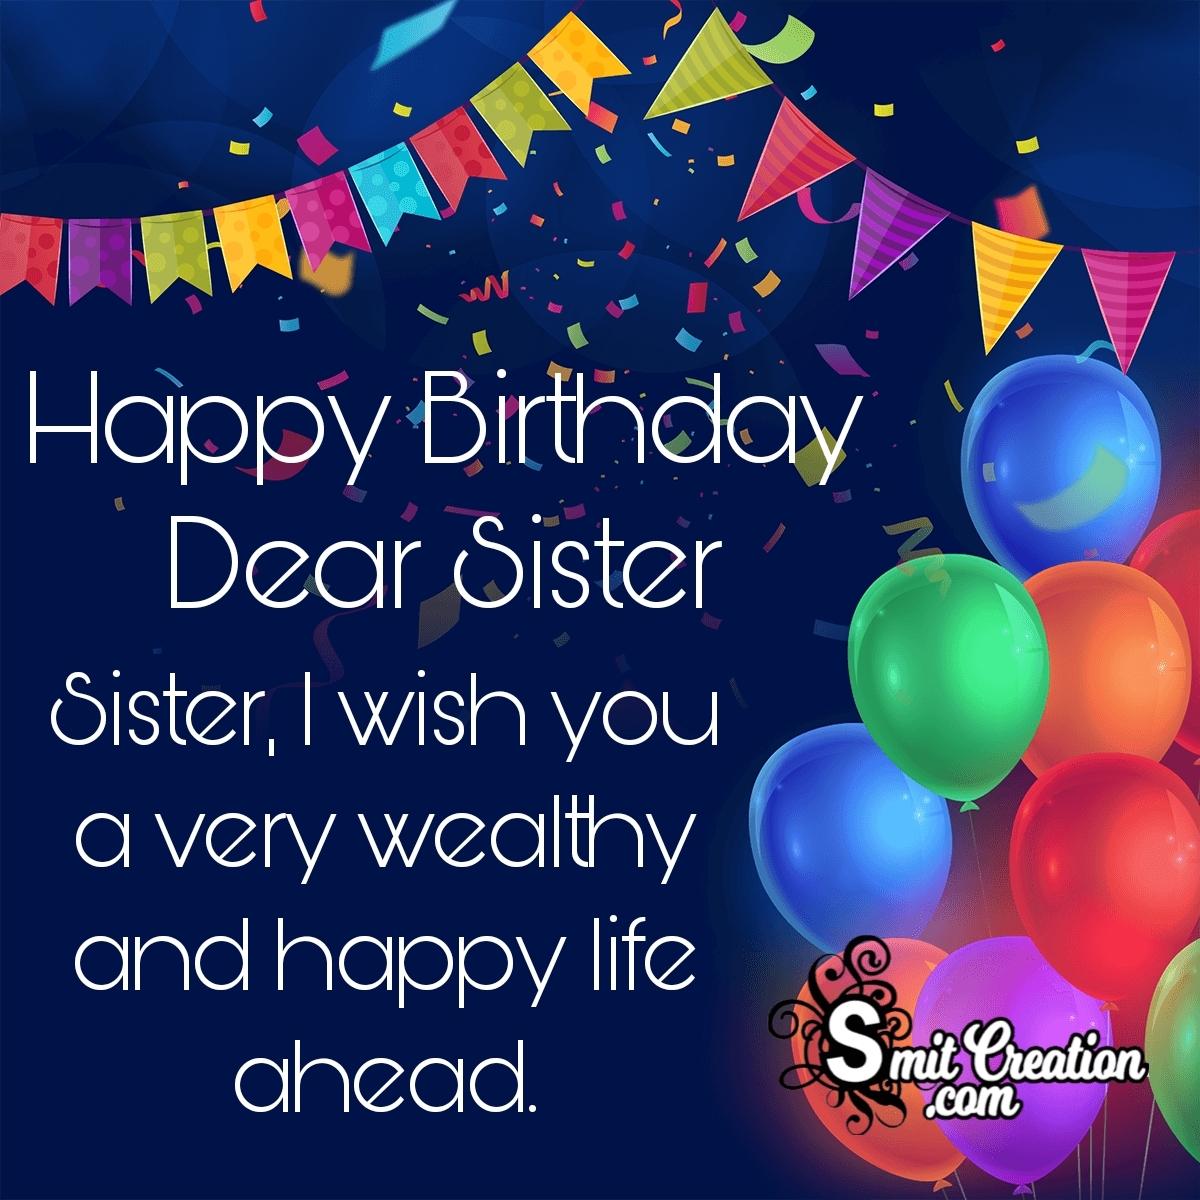 The Ultimate Collection of 4K Happy Birthday Images for Sister Over